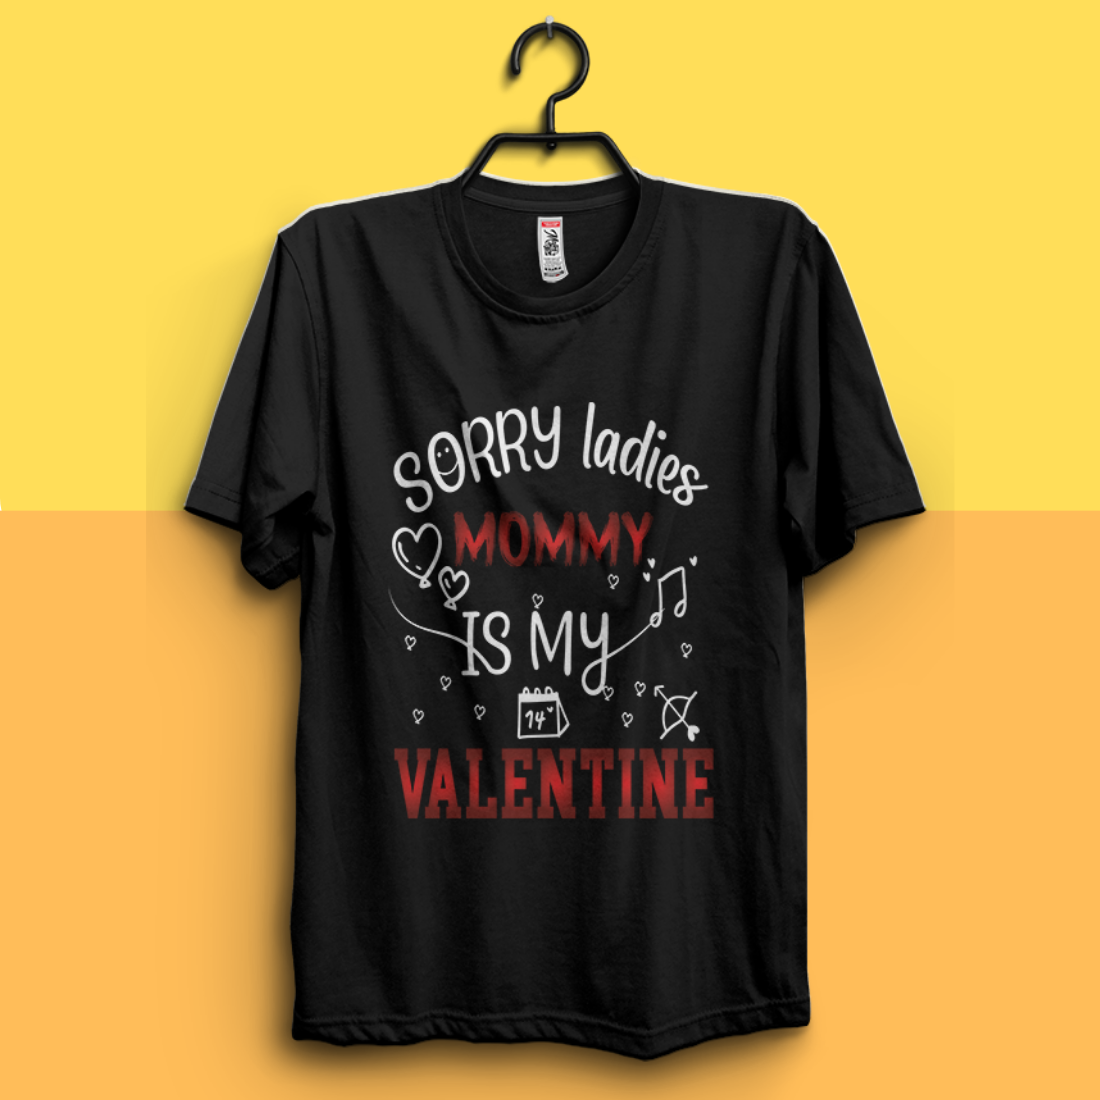 Valentines Day T-Shirt design sorry ladies mommy is my valentine best-selling typography vector t-shirt design fully editable and printable cover image.